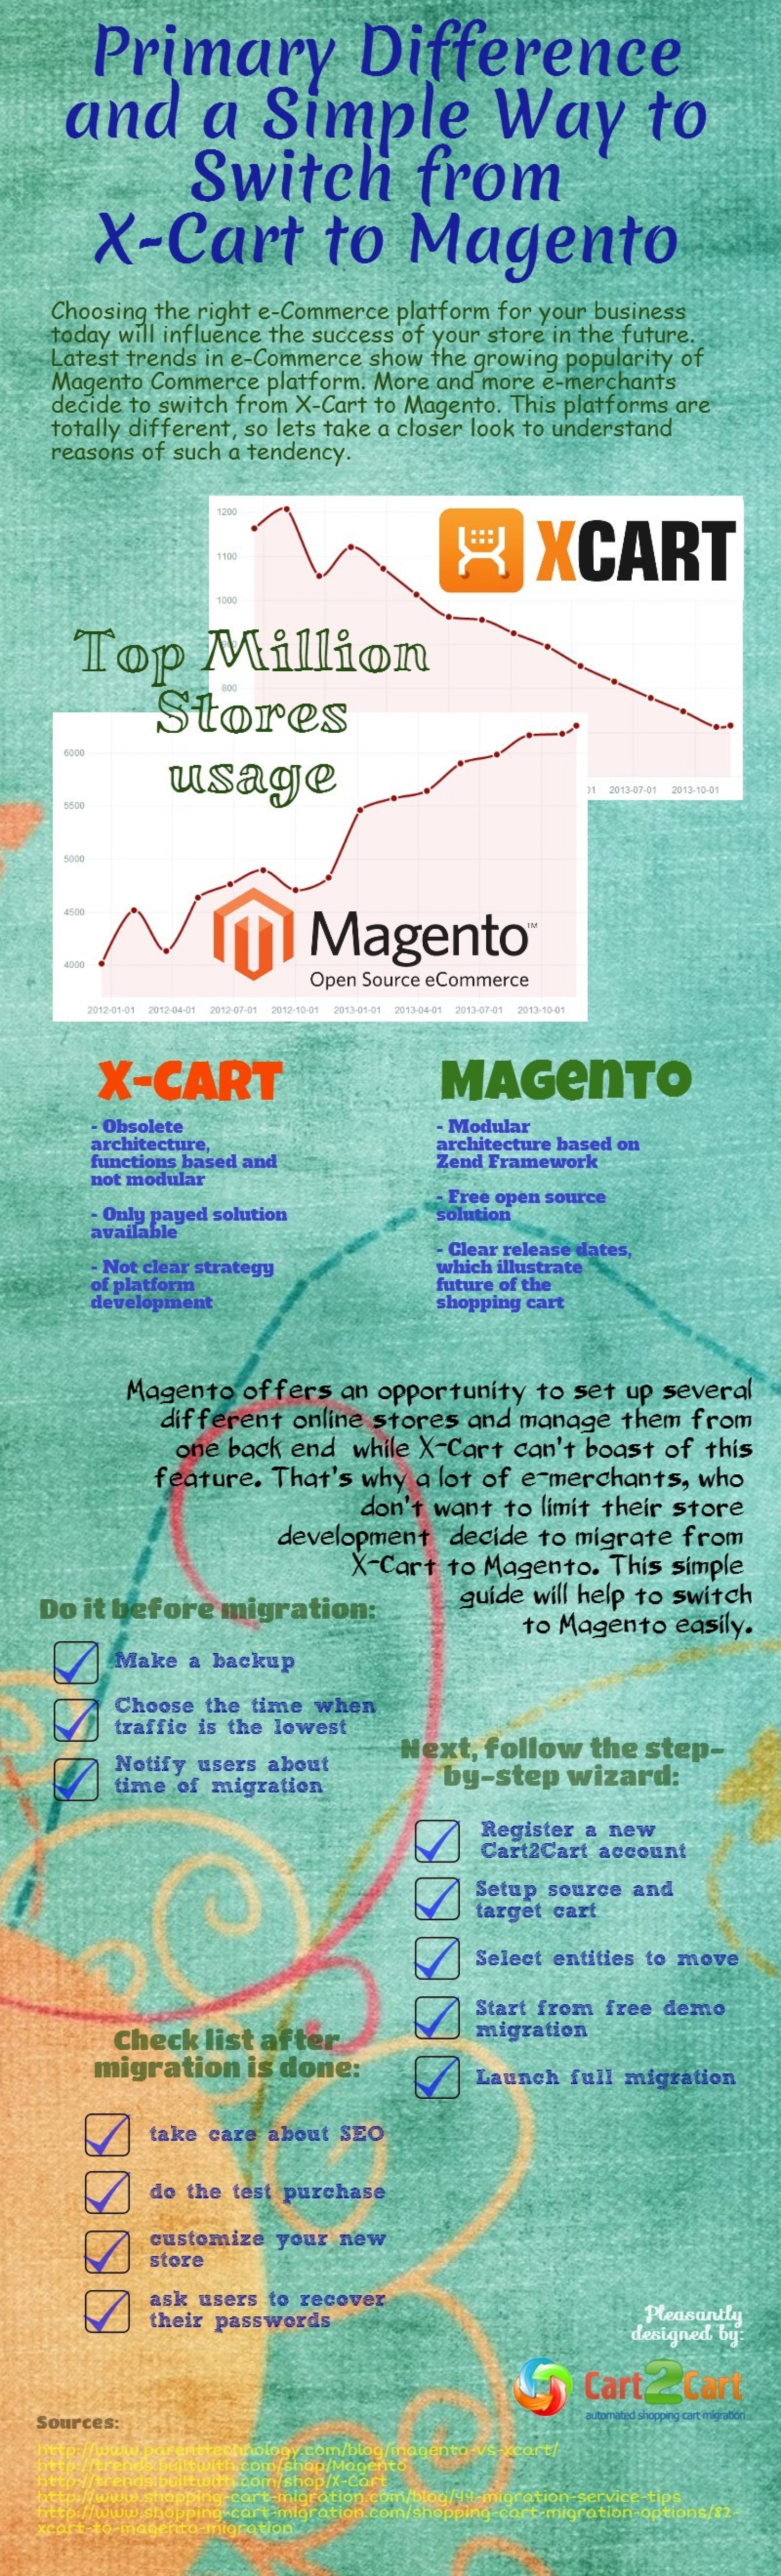 Primary Difference and a Simple Way to Switch from X-Cart to Magento Infographic